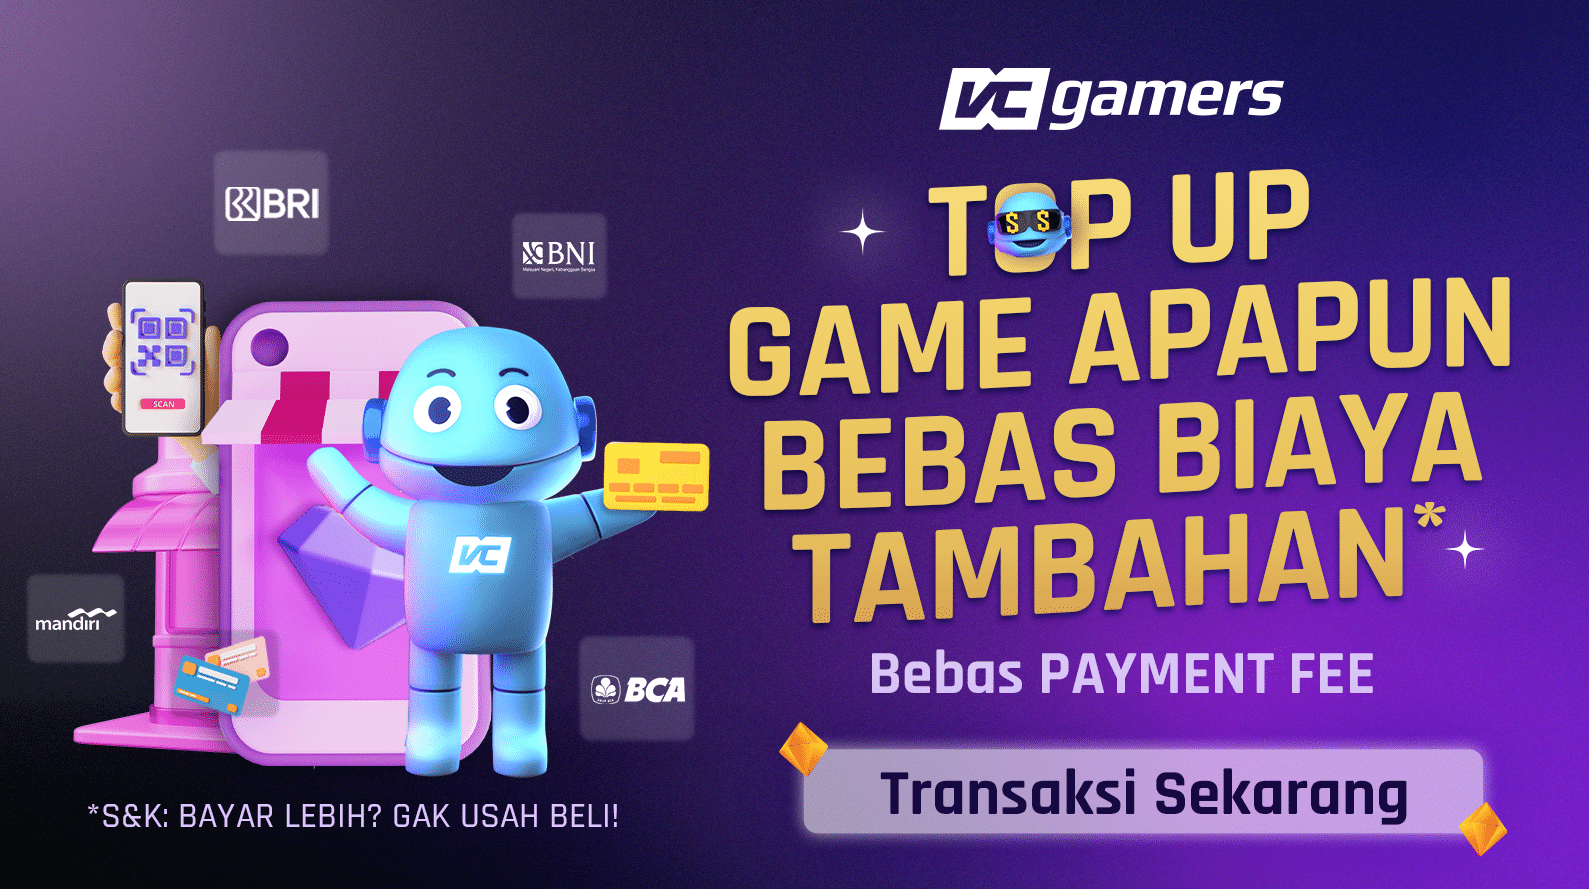 VCGamers Free Admin Fee Free Payment Fee